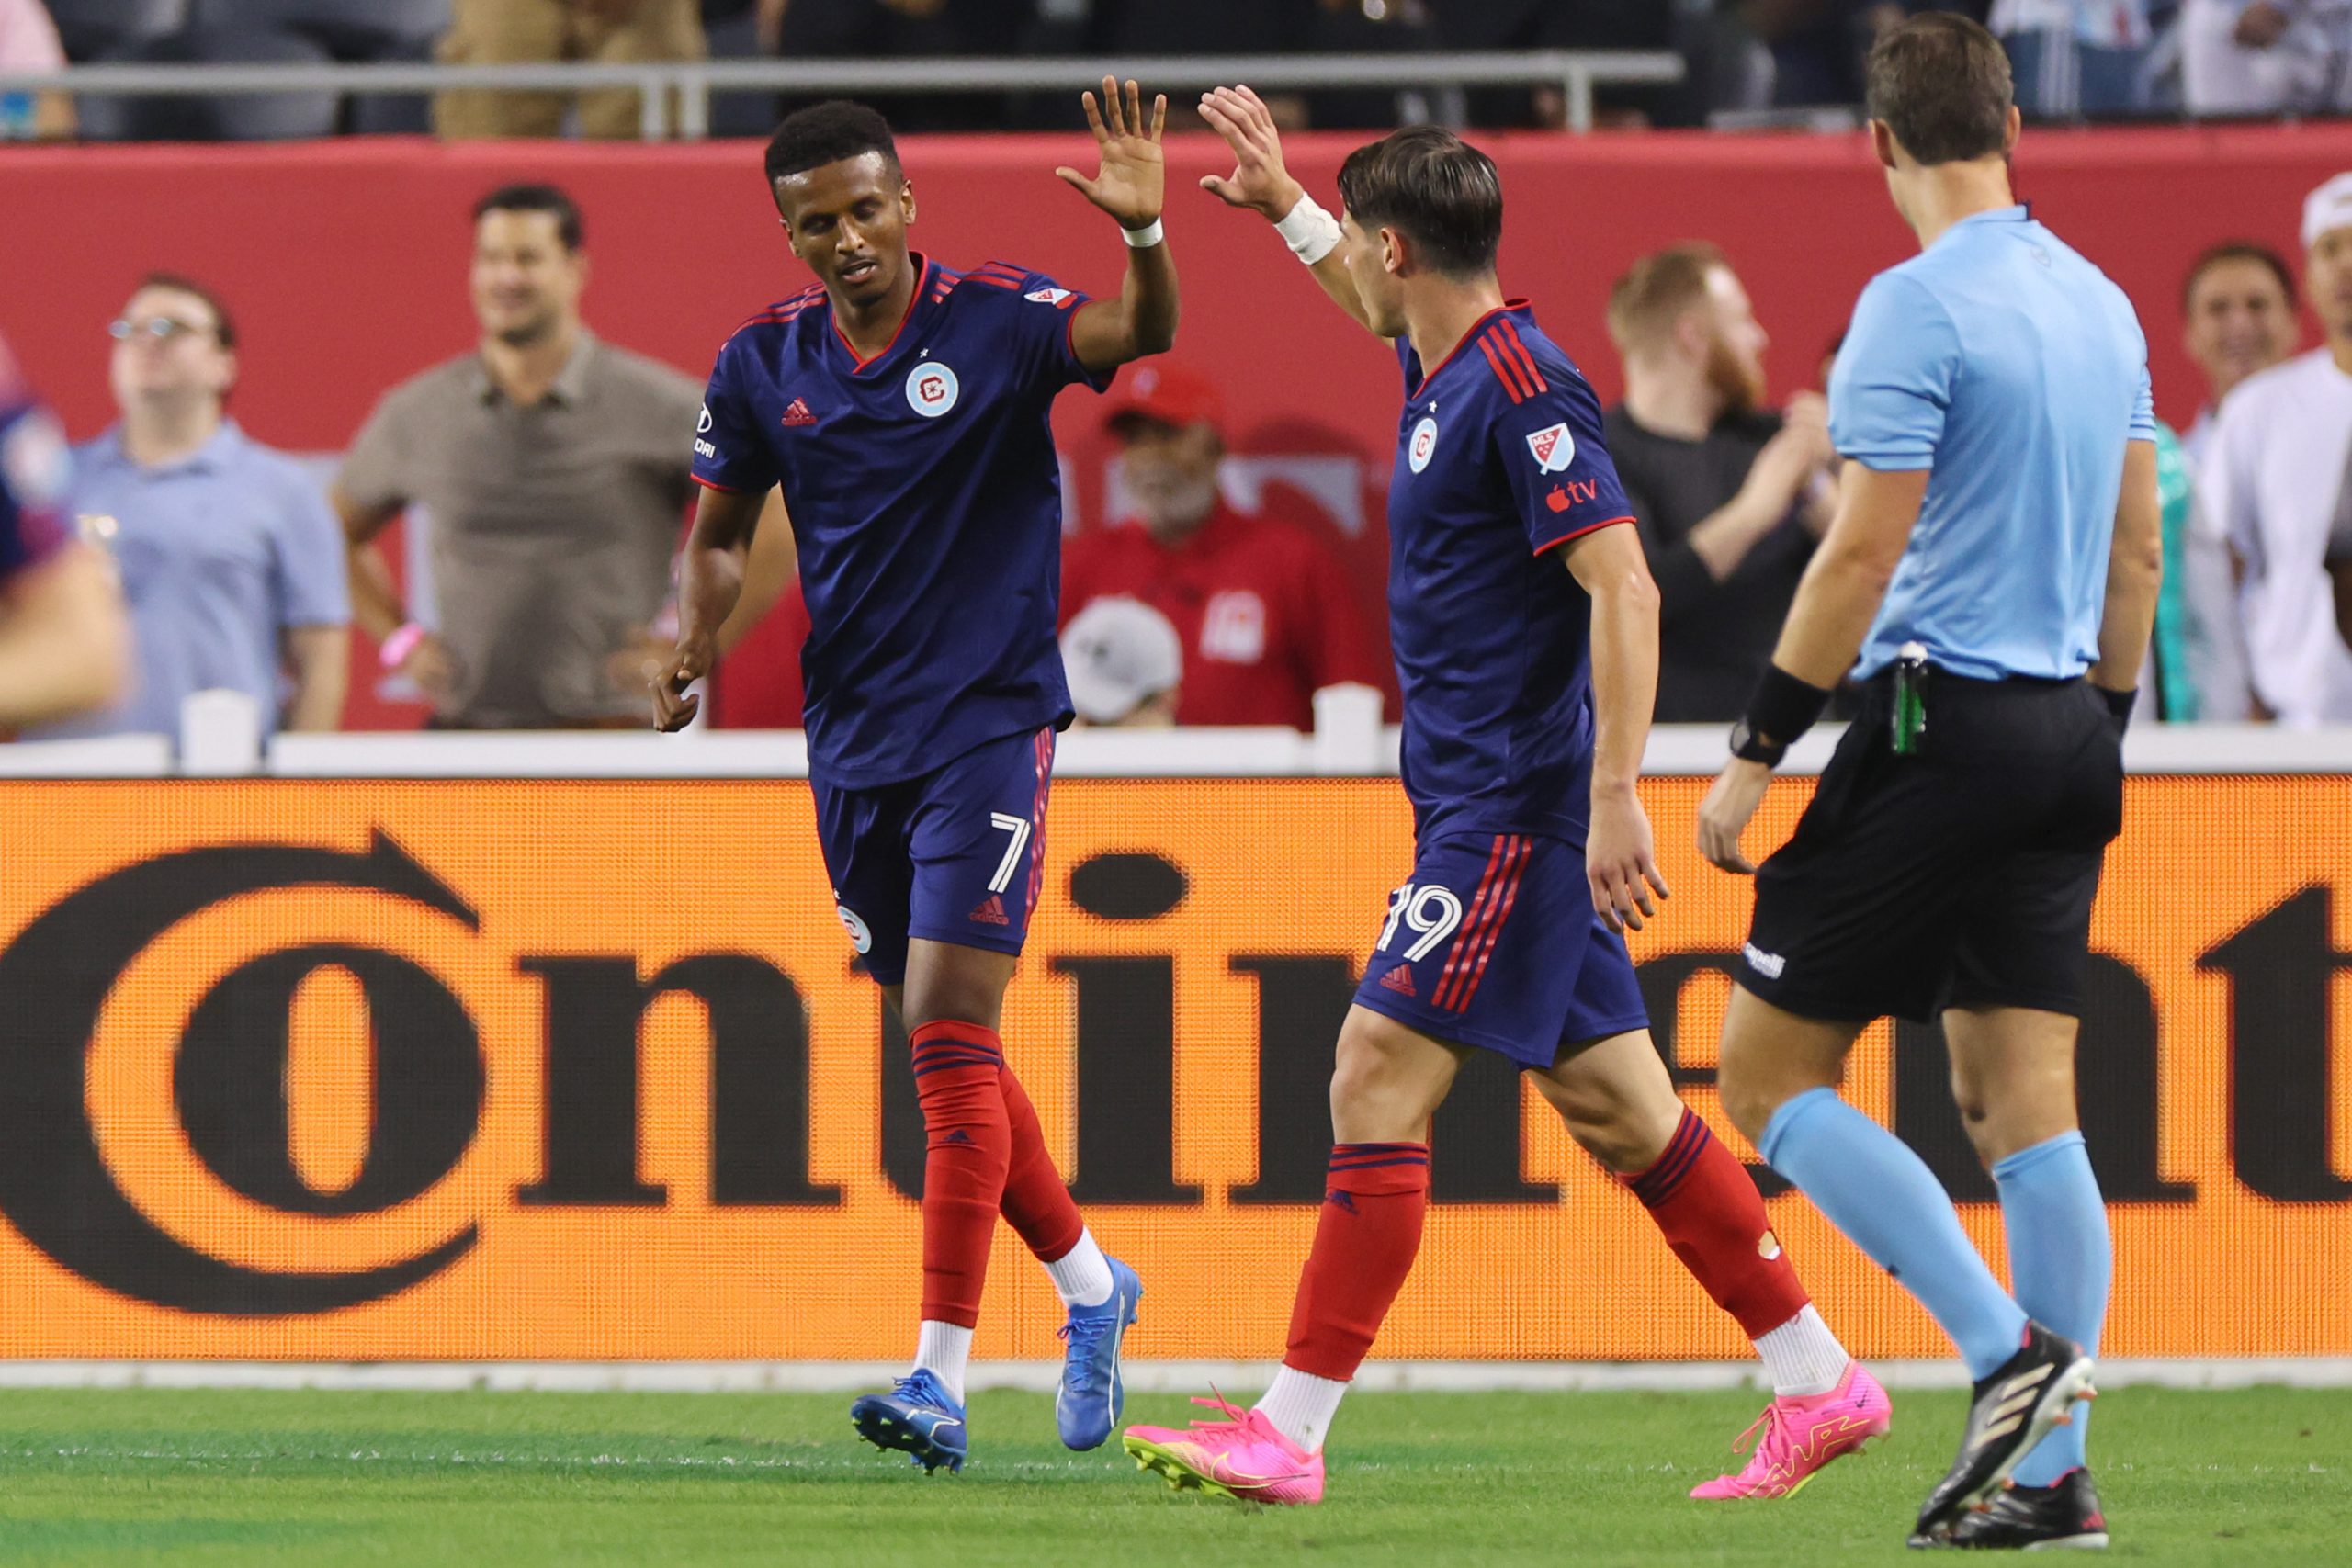 Haile-Sellasie celebra gol do Chicago Fire (Foto: Michael Reaves/Getty Images)